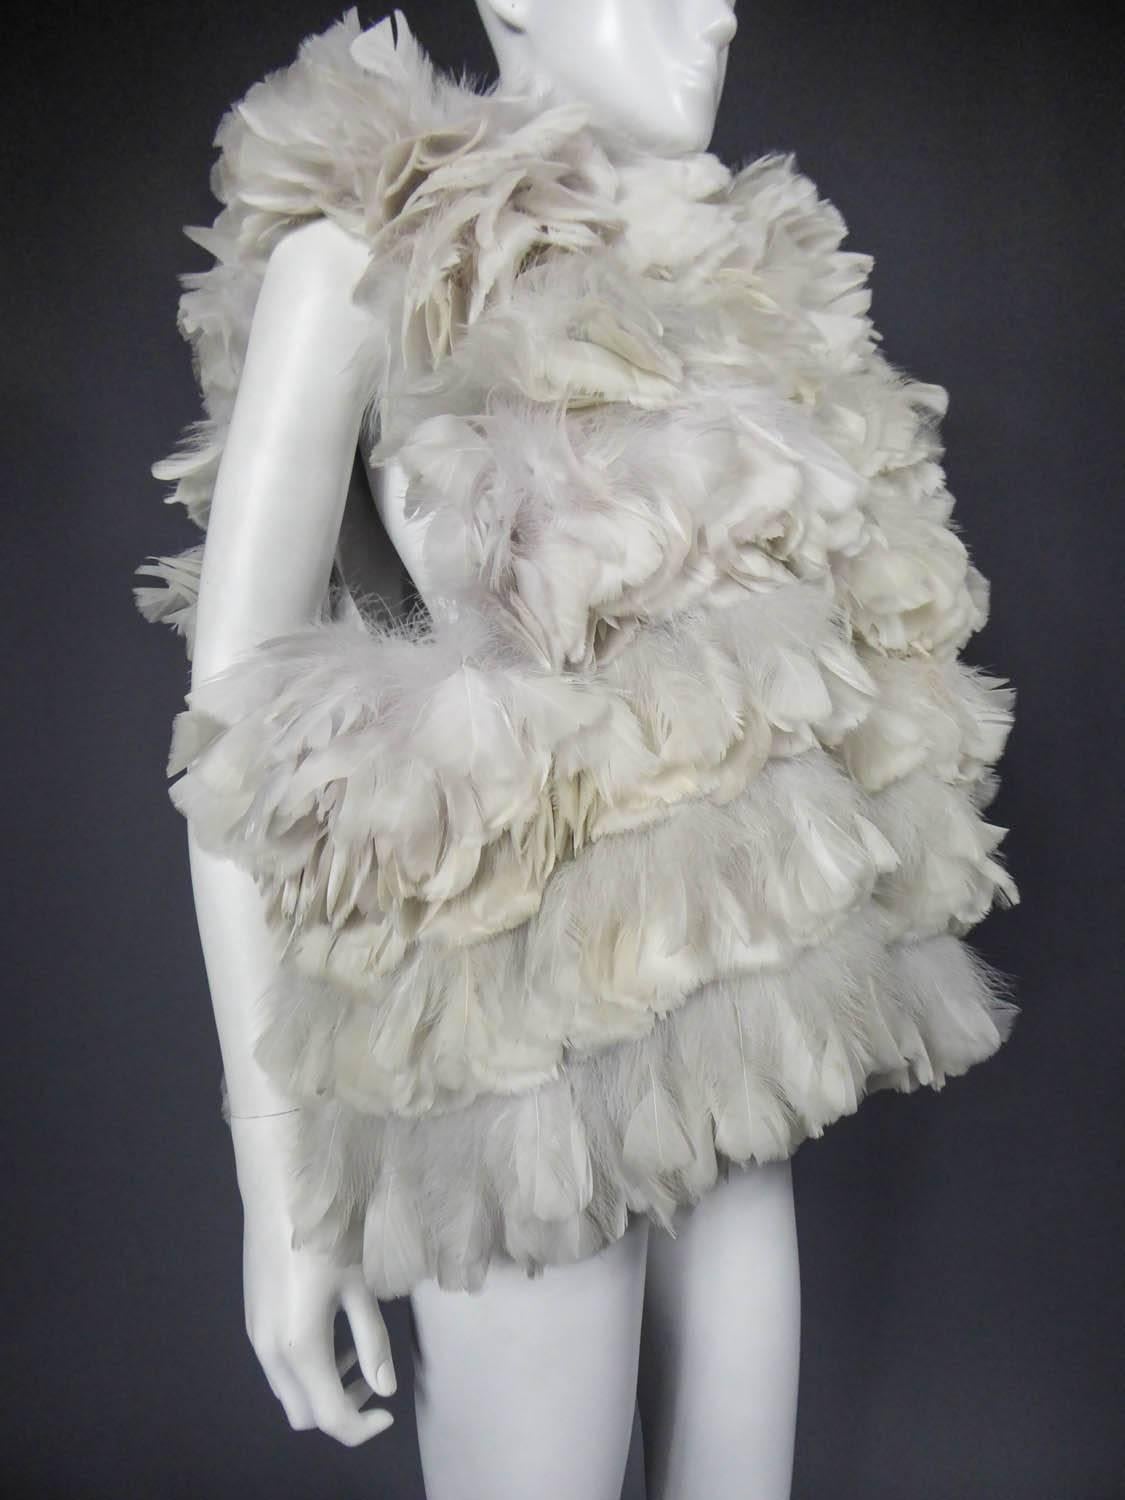 Circa 2000

France

Sleeveless jacket Sonia Rykiel in feather with a ball effect from the 2000s. Rows of feathers and downs from a wide collar in hen. Feathers in shades of gray ranging from white to straw yellow. Lining in pale gray silk taffeta.